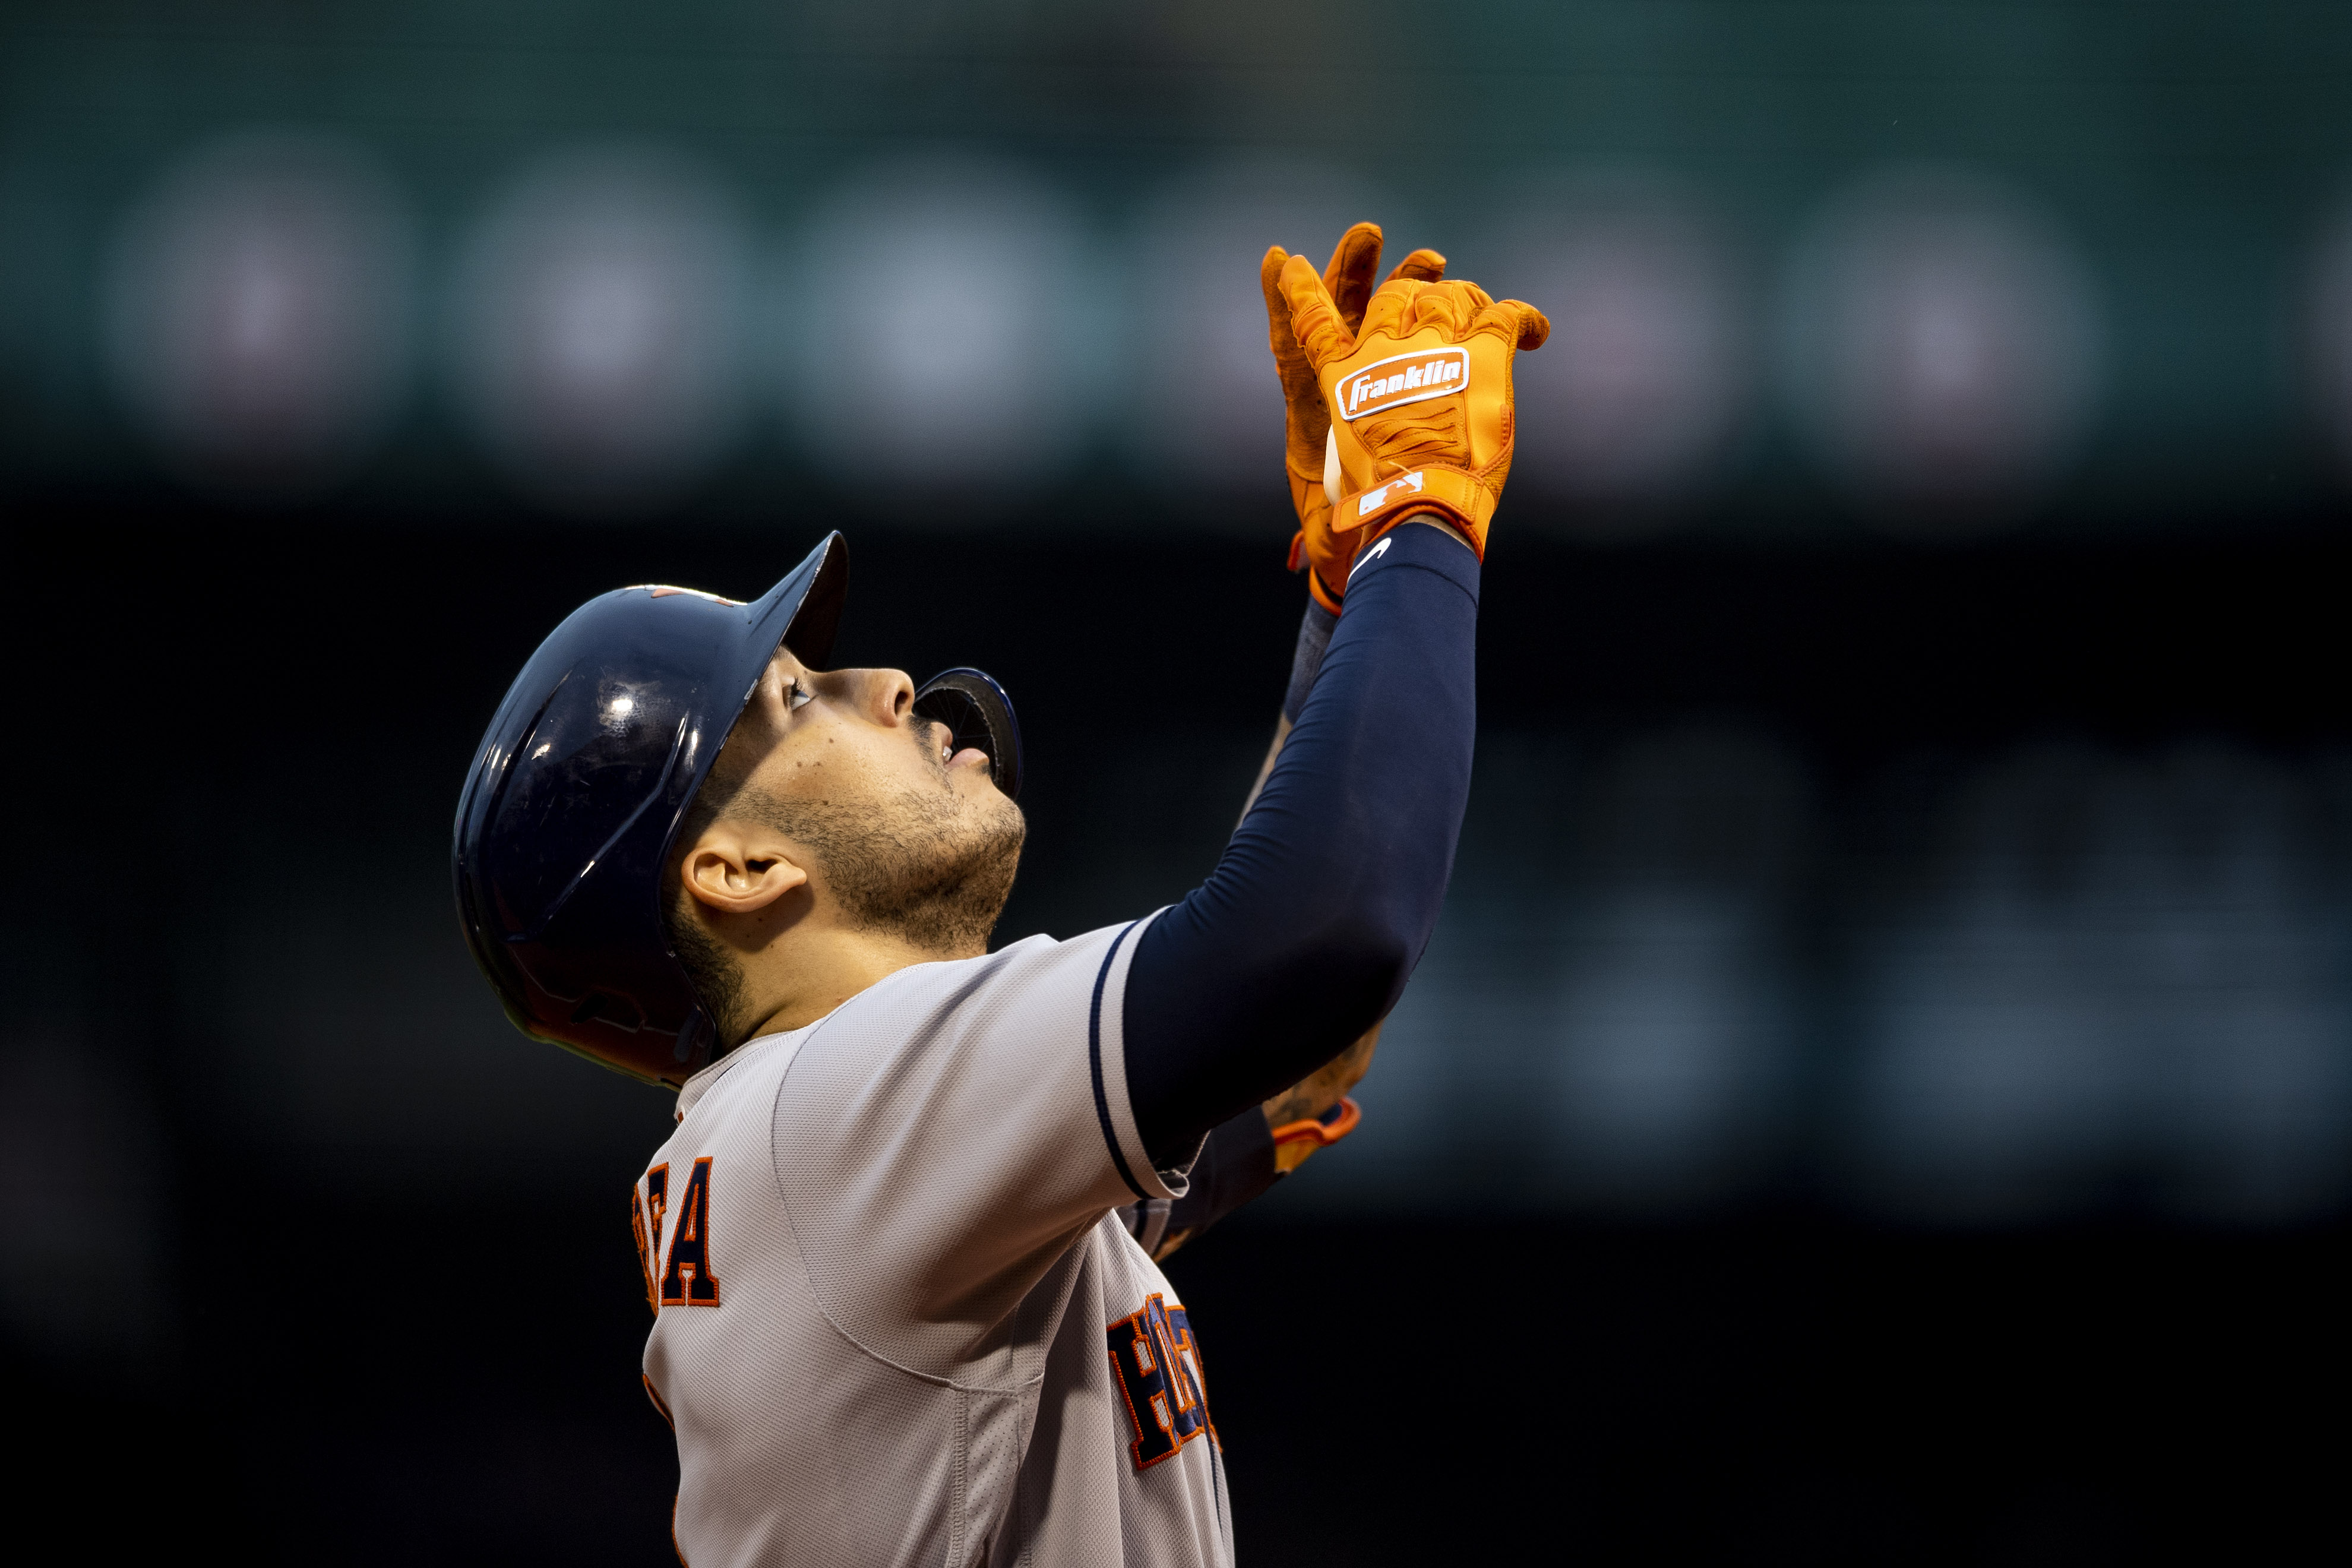 MLB: Houston Astros' Correa open to longer contract if deal done soon